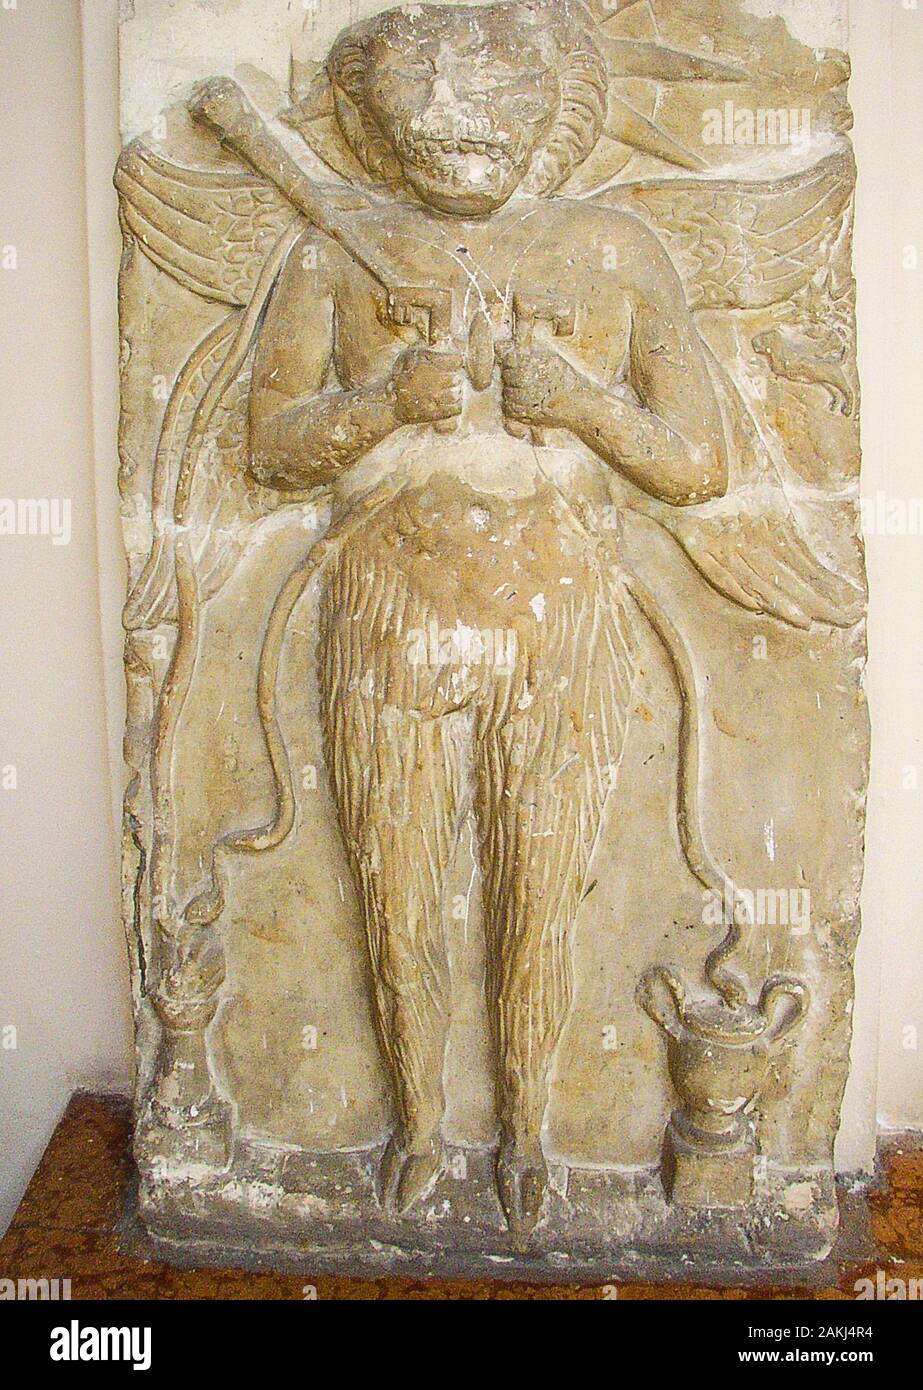 Egypt, Alexandria, Graeco-Roman Museum, statue of Aion Chronos, a winged lion with goat-legs. He holds a scepter, keys and snakes. Stock Photo